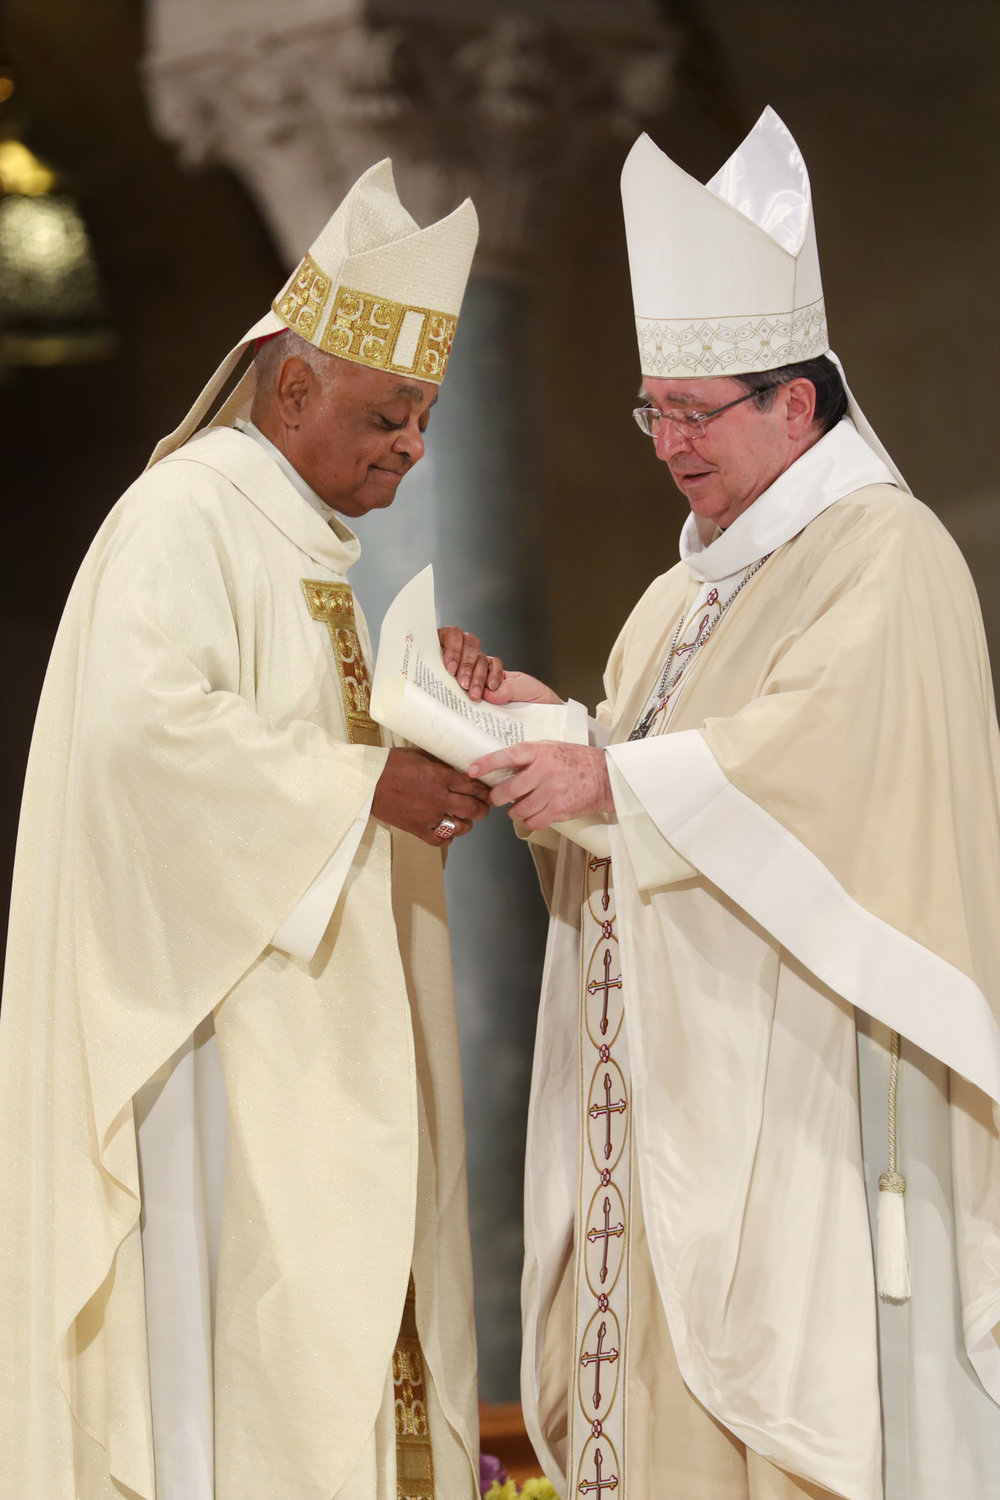 Archbishop Wilton D. Gregory receives the papal bull on his appointment to Washington from Archbishop Christophe Pierre, apostolic nuncio to the United States, during his installation Mass at the Basilica of the National Shrine of the Immaculate Conception in Washington May 21, 2019.